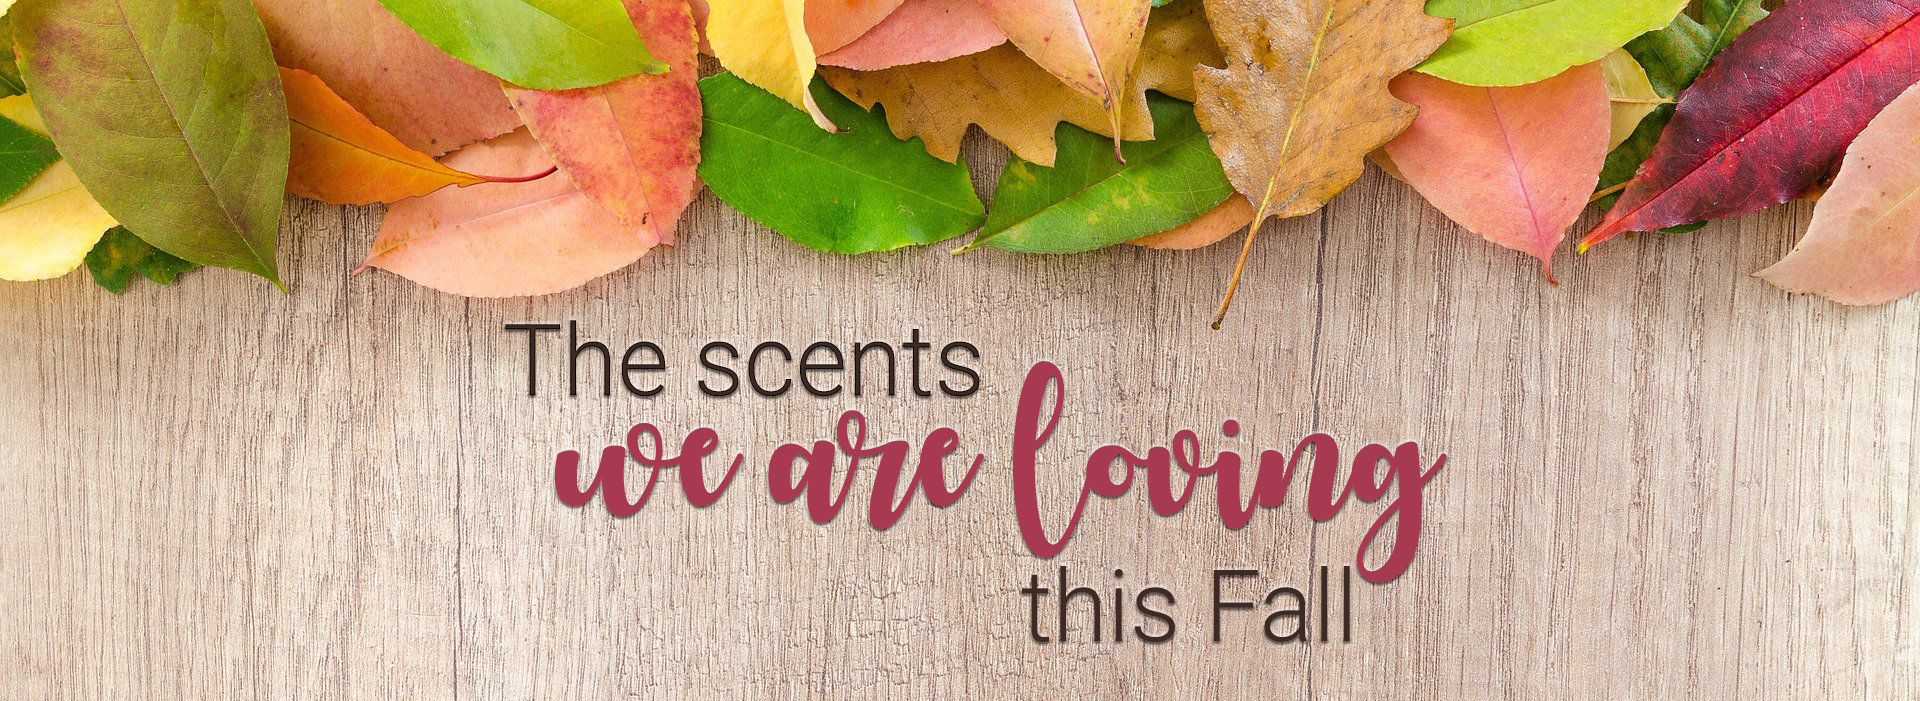 Collect what you love for fall. Featuring Pumpkin Spice, Pumpkin Pie and Creme Brulee. creme